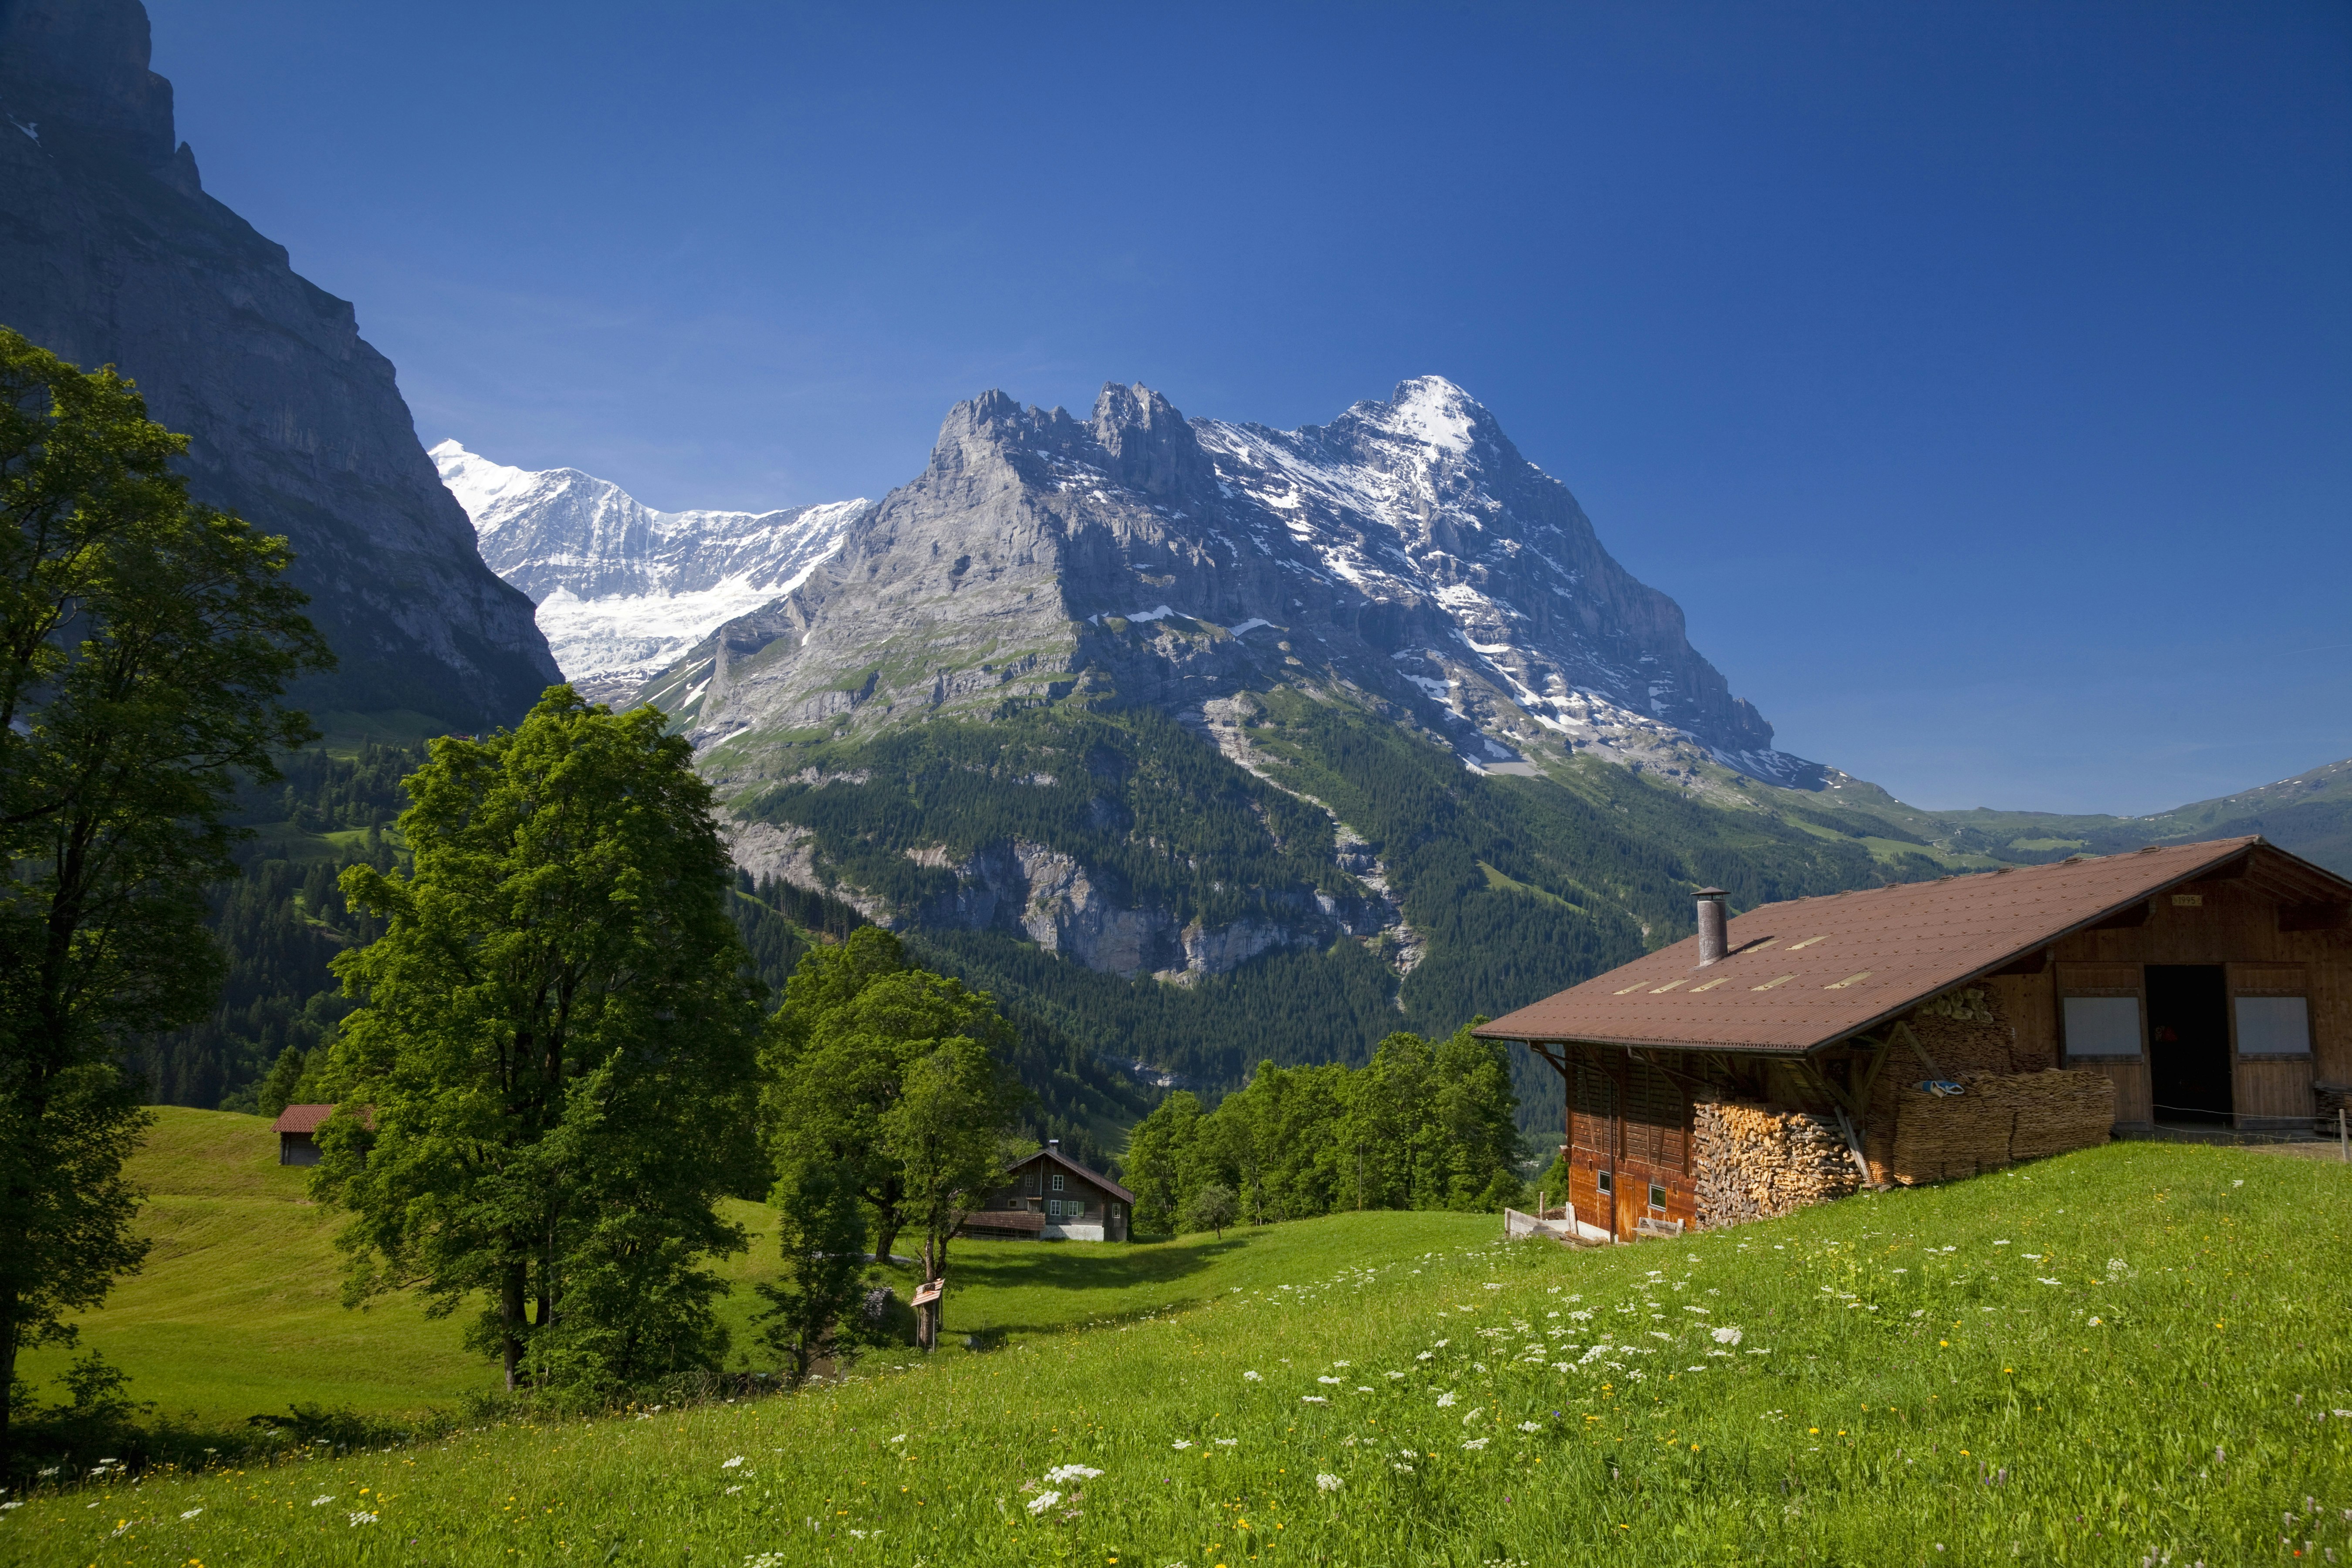 Europe, Switzerland, Grindelwald, View of Eiger and hut. Image by: JTB Photo /UIG via Getty Images